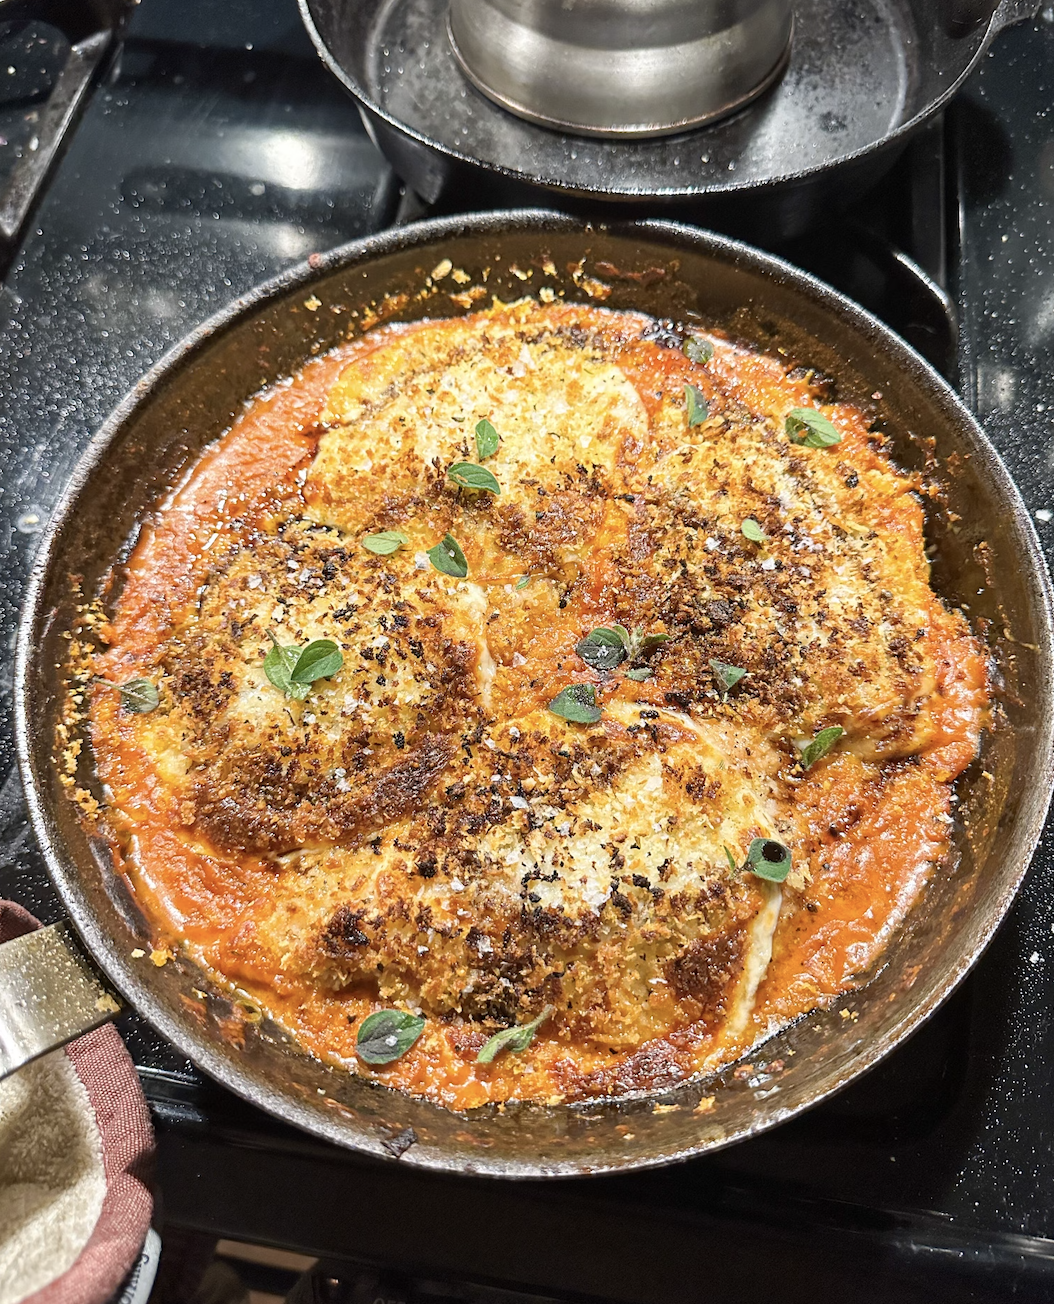 Chicken Parm covered in cheese and bread crumbs in a skillet